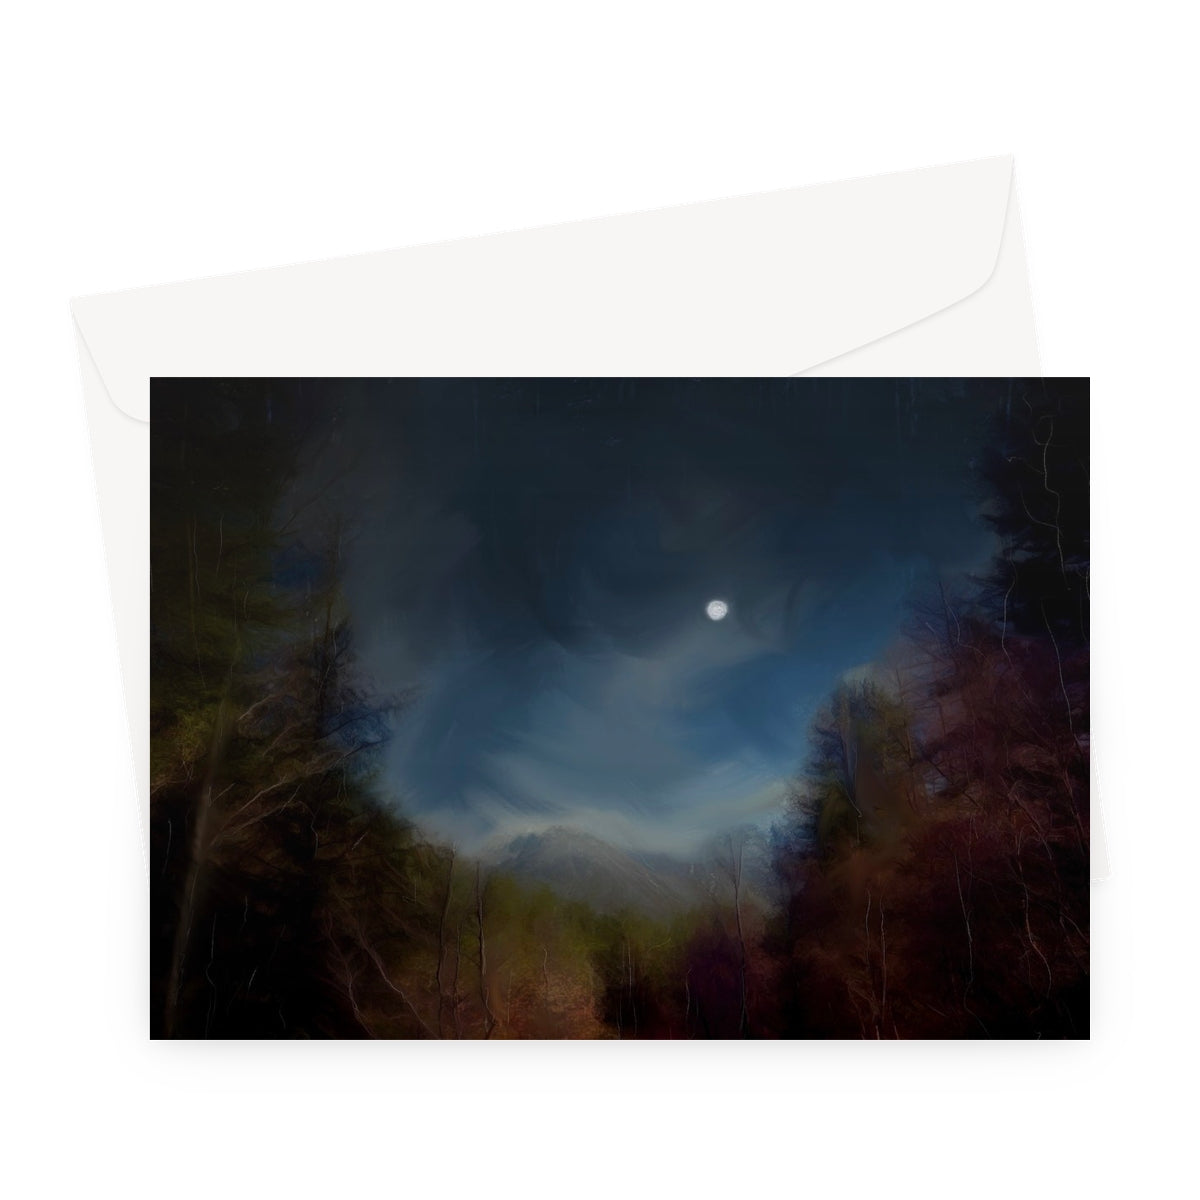 Glencoe Lochan Moonlight Art Gifts Greeting Card-Greetings Cards-Scottish Lochs & Mountains Art Gallery-A5 Landscape-10 Cards-Paintings, Prints, Homeware, Art Gifts From Scotland By Scottish Artist Kevin Hunter